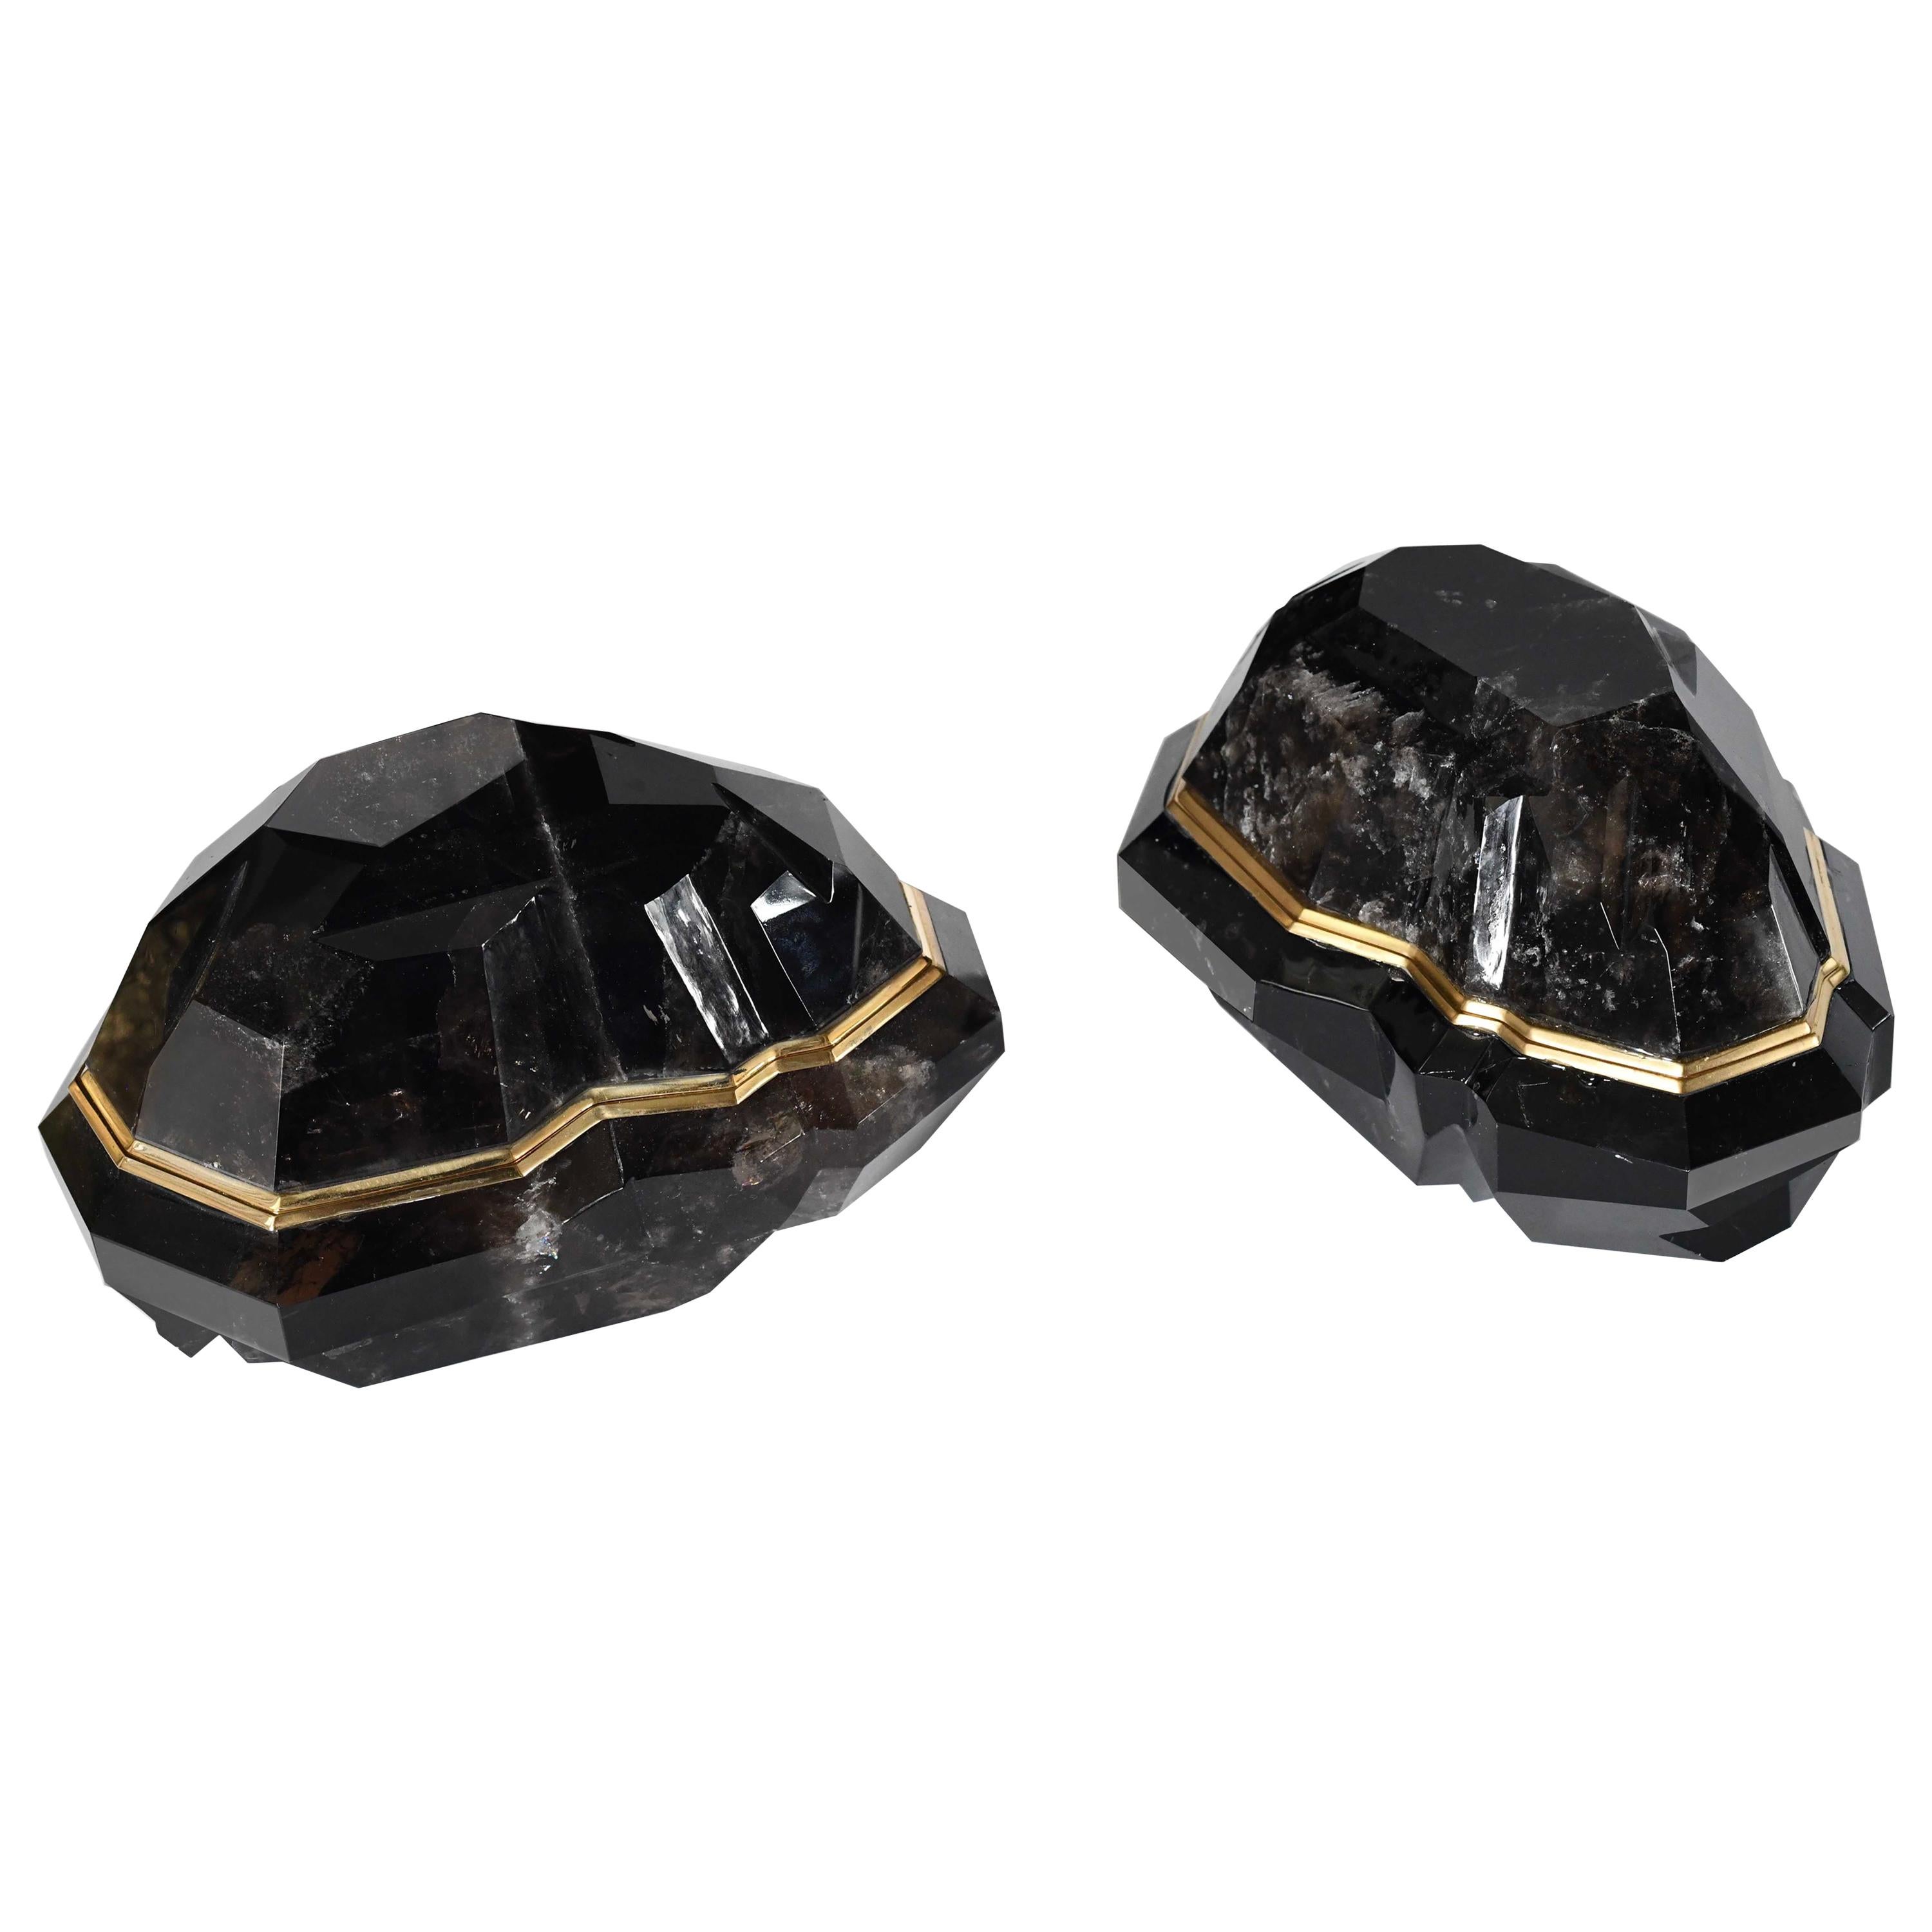 Multifaceted Smoky Rock Crystal Boxes by Phoenix For Sale